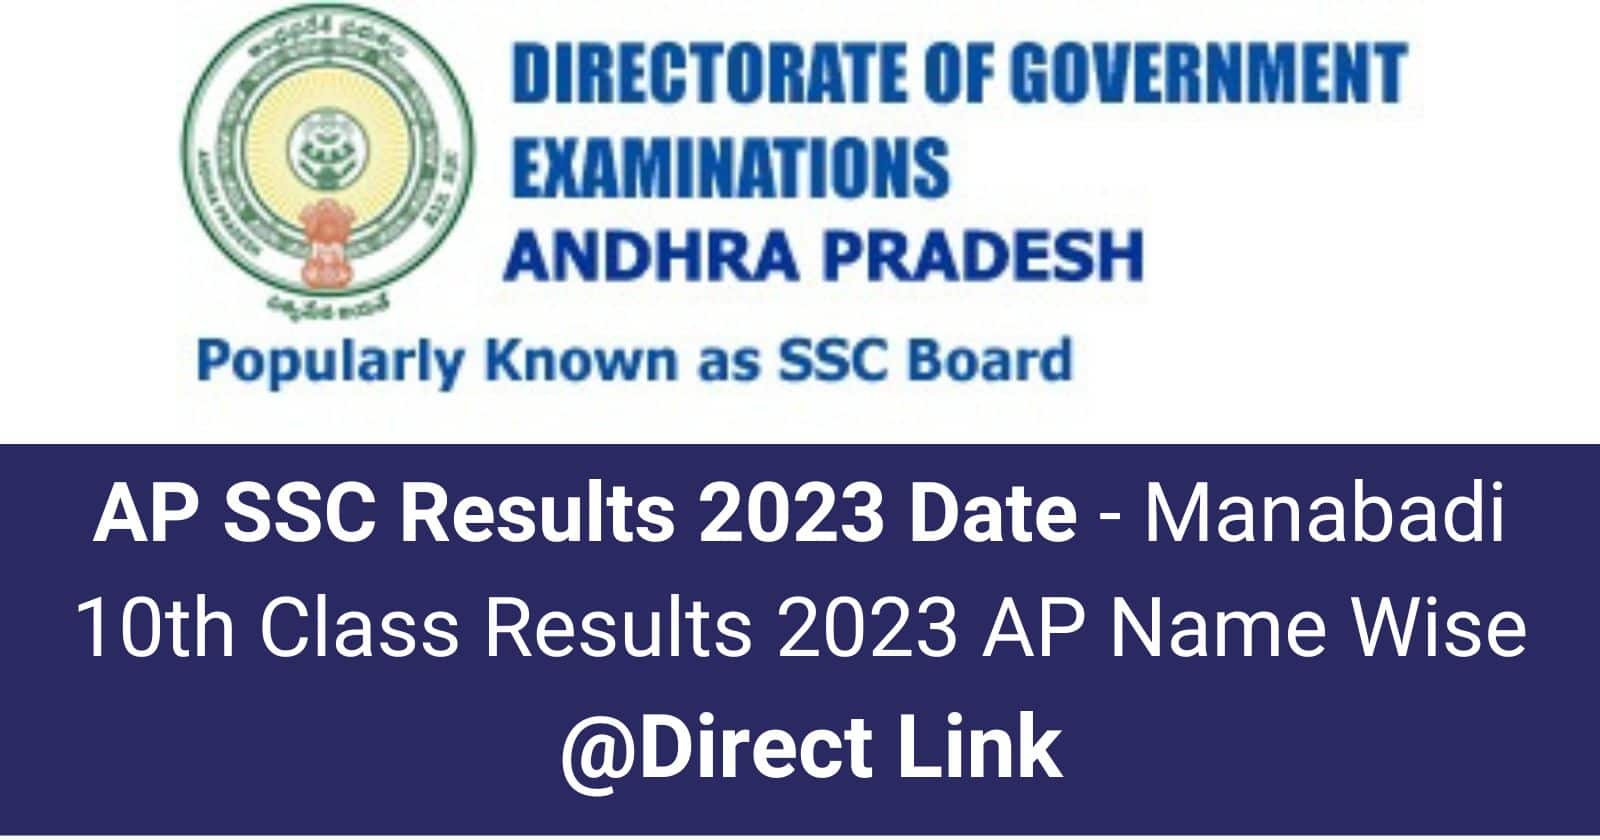 AP SSC Results 2023 OUT Manabadi 10th Class Results 2023 AP Name Wise